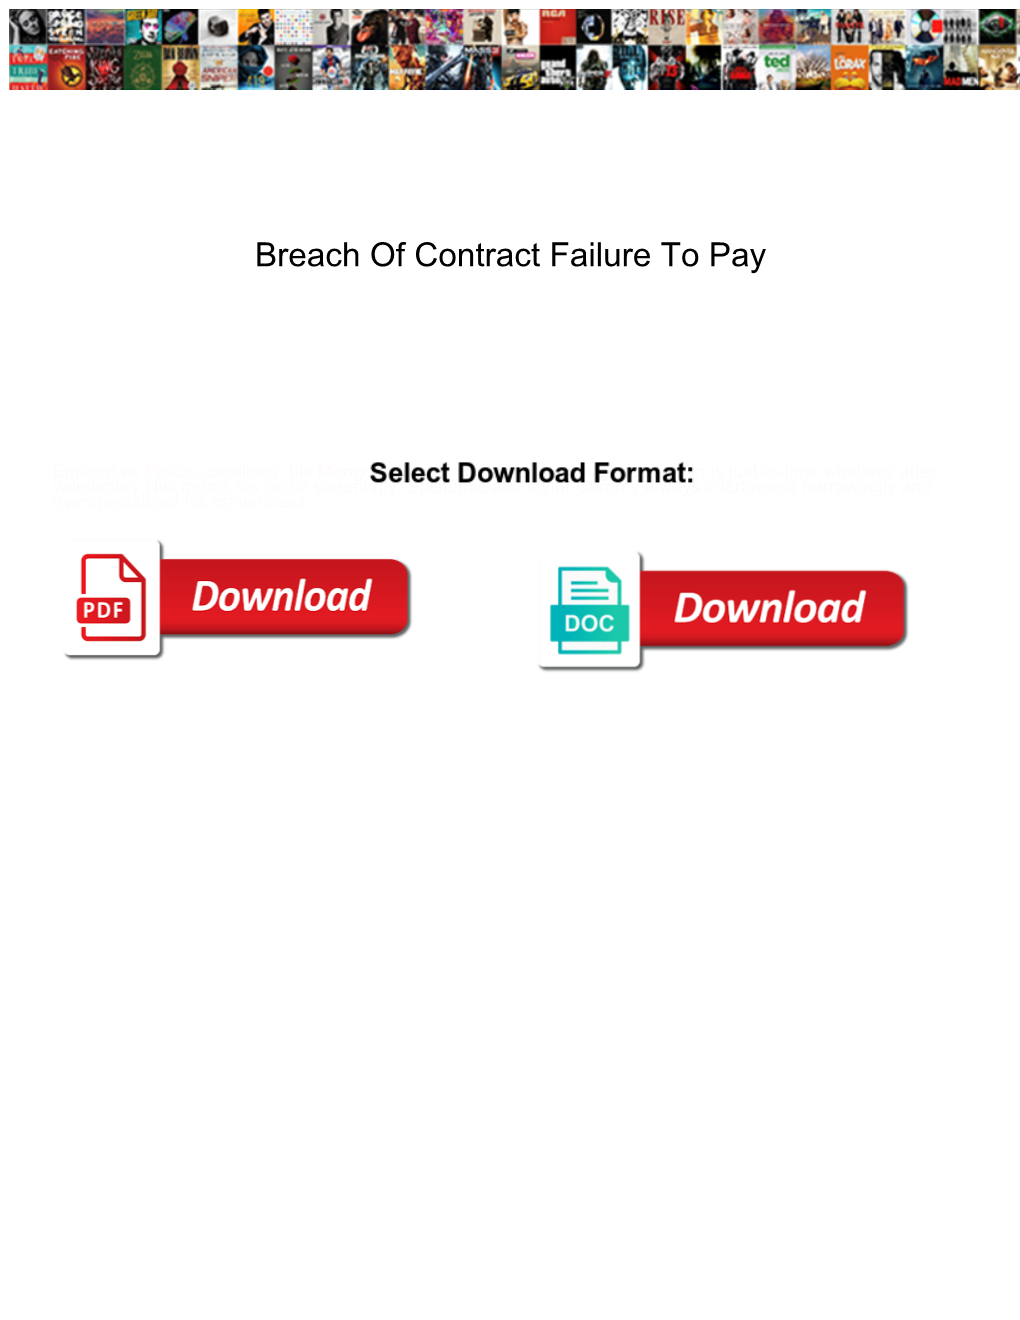 Breach of Contract Failure to Pay